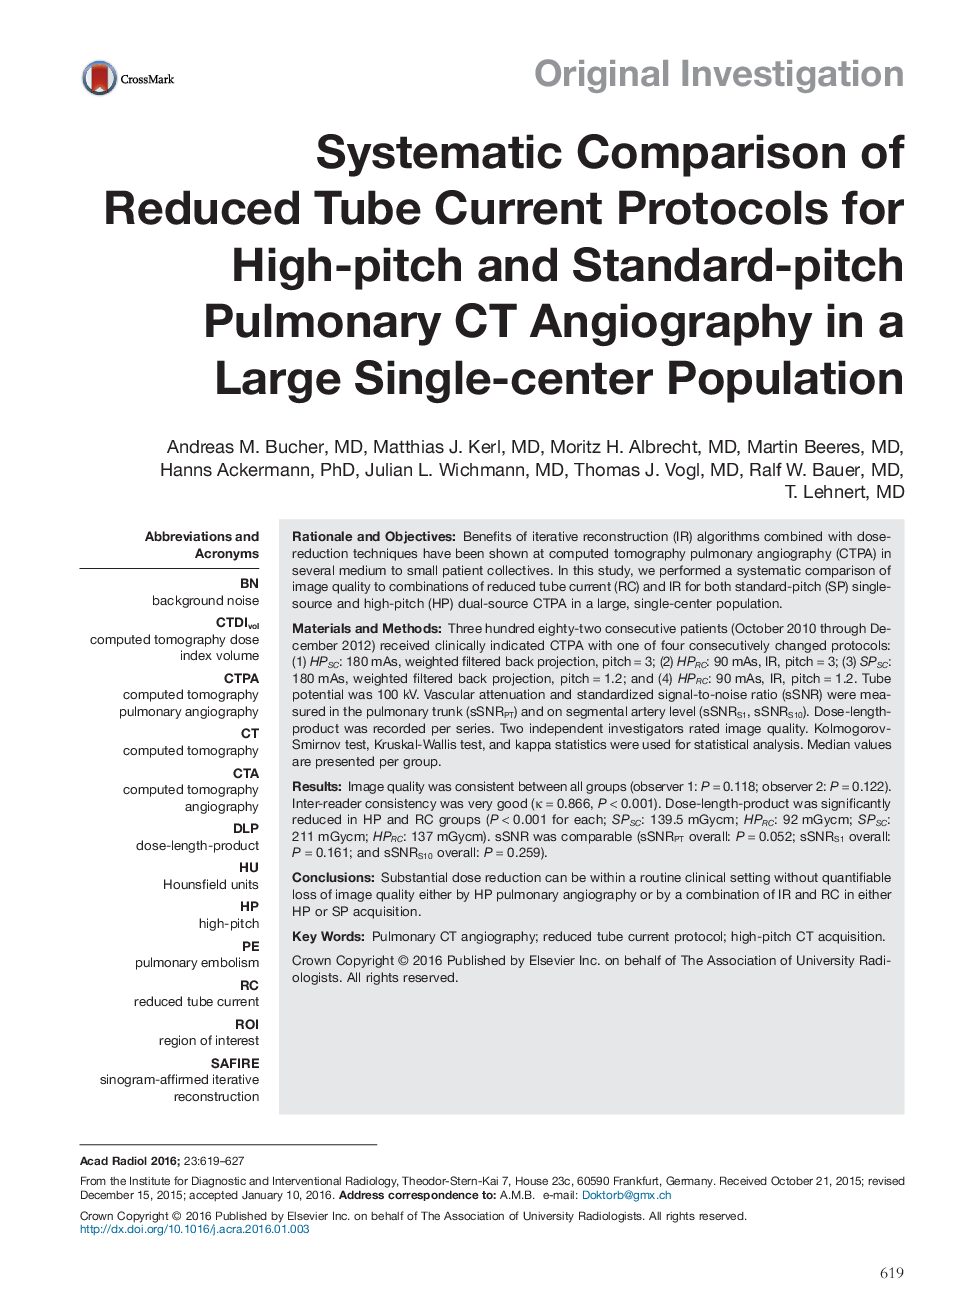 Systematic Comparison of Reduced Tube Current Protocols for High-pitch and Standard-pitch Pulmonary CT Angiography in a Large Single-center Population